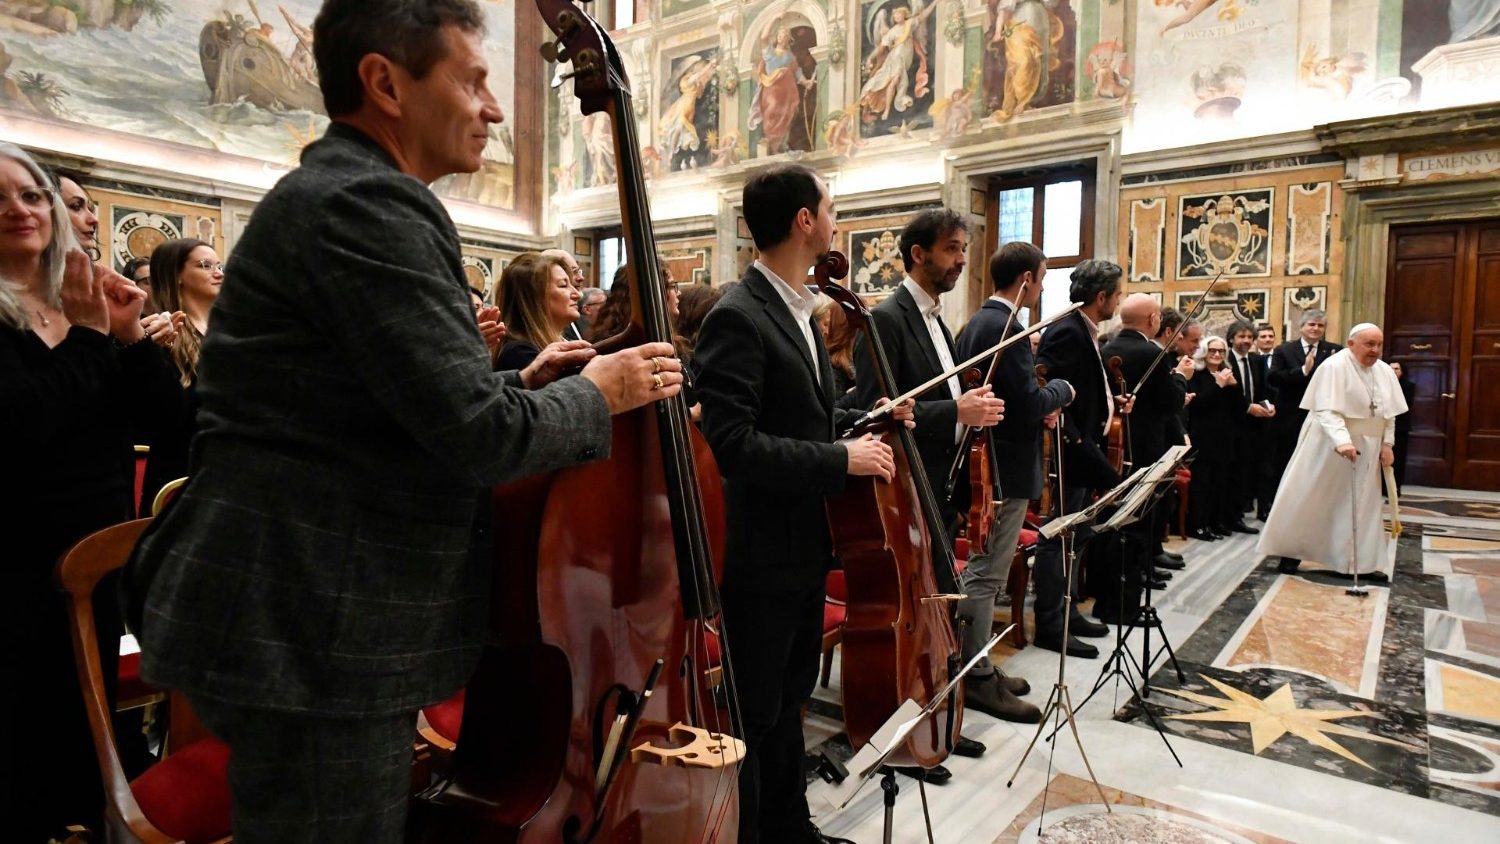 Pope Francis meets artists and musicians in Verona Square